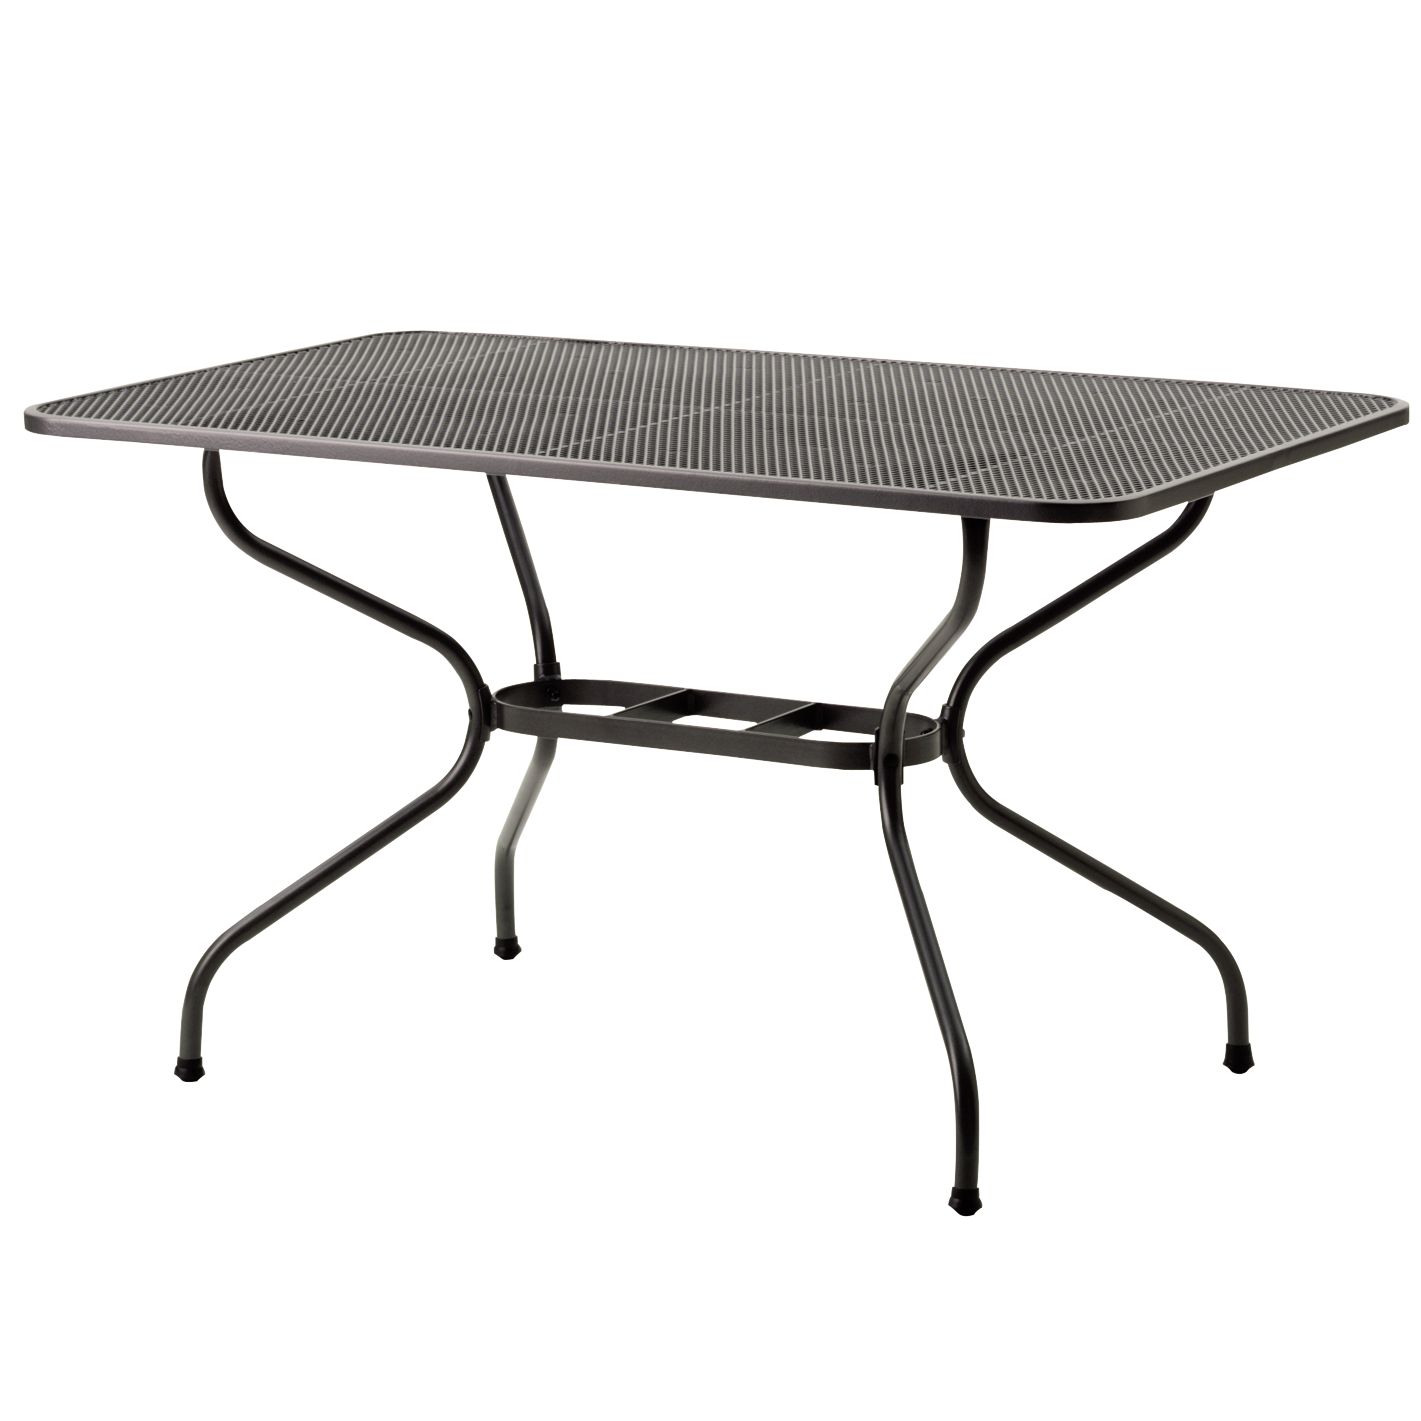 Kettler Henley Classic Outdoor Dining Table